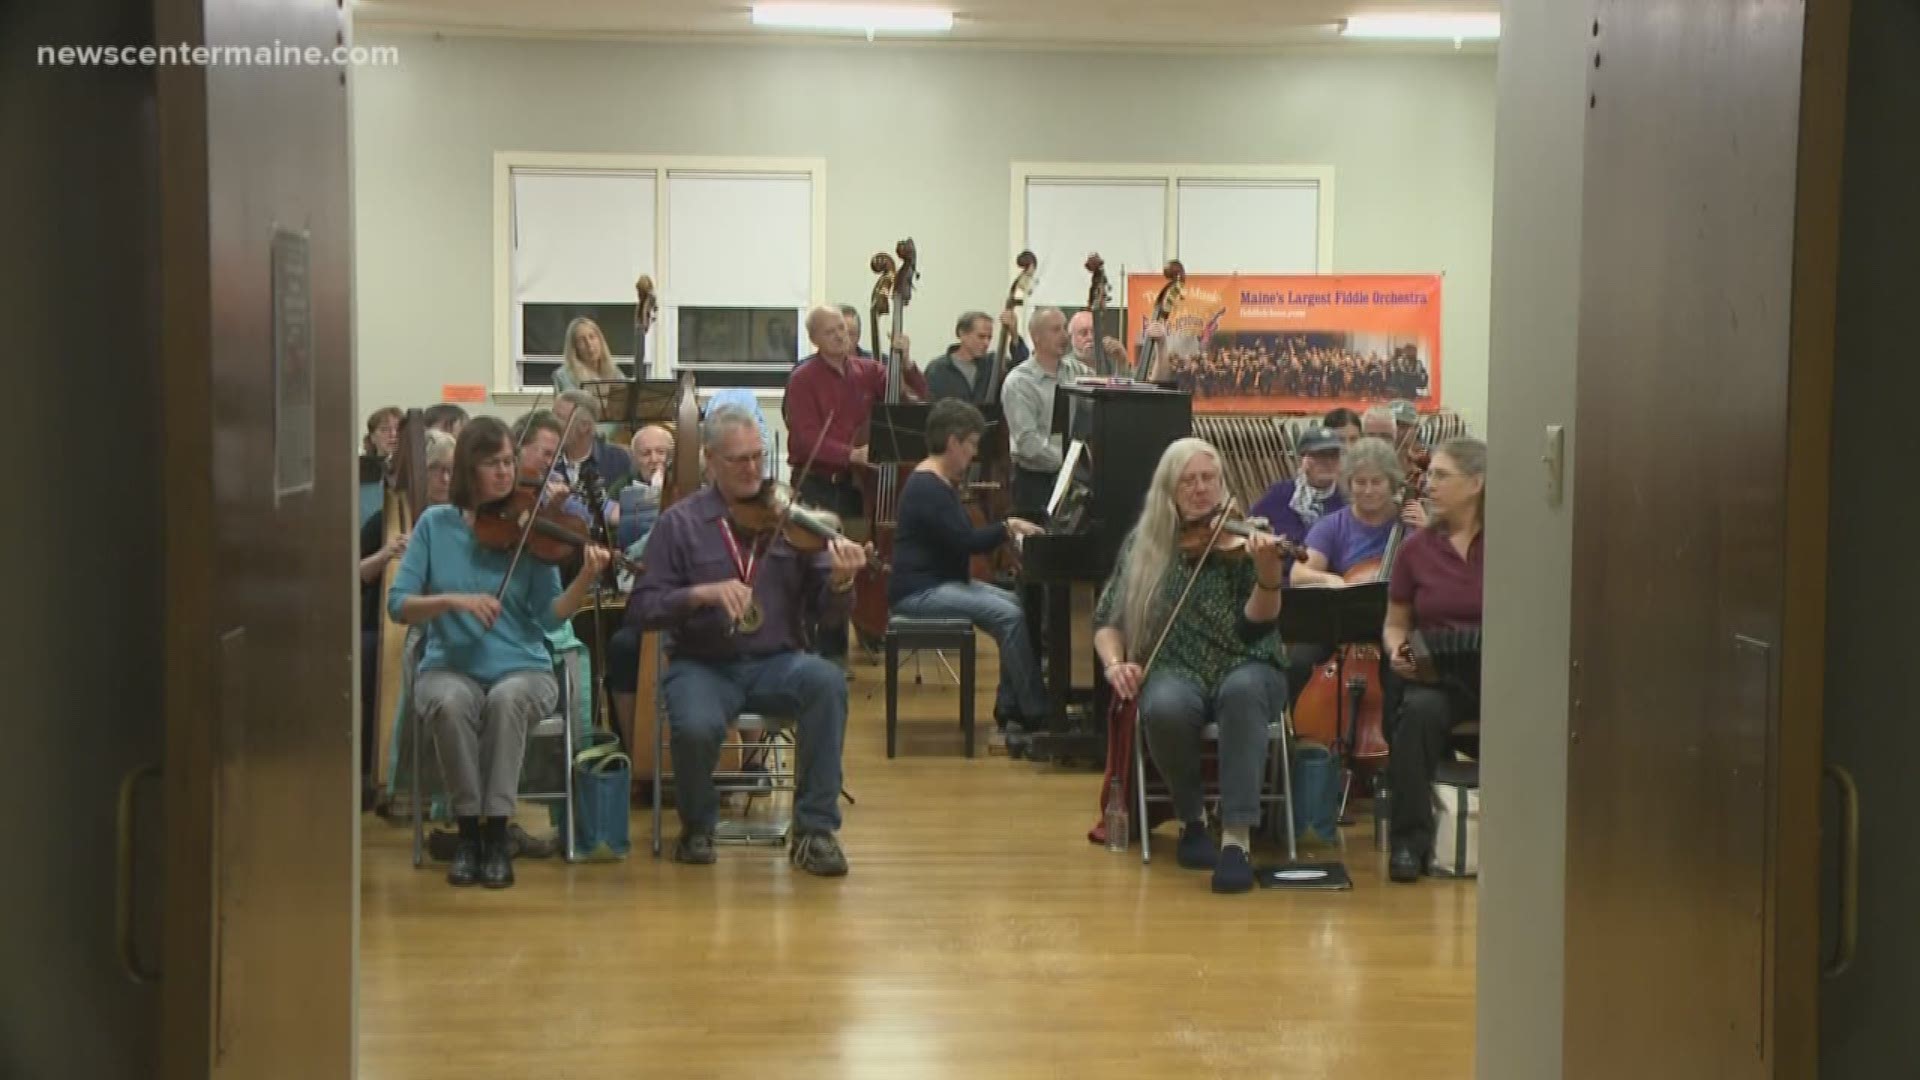 Fiddle-icious is a rag-tag group of musicians that meets once a week to play together; believe it or not, the group makes up a much larger orchestra than the Portland Symphony Orchestra.